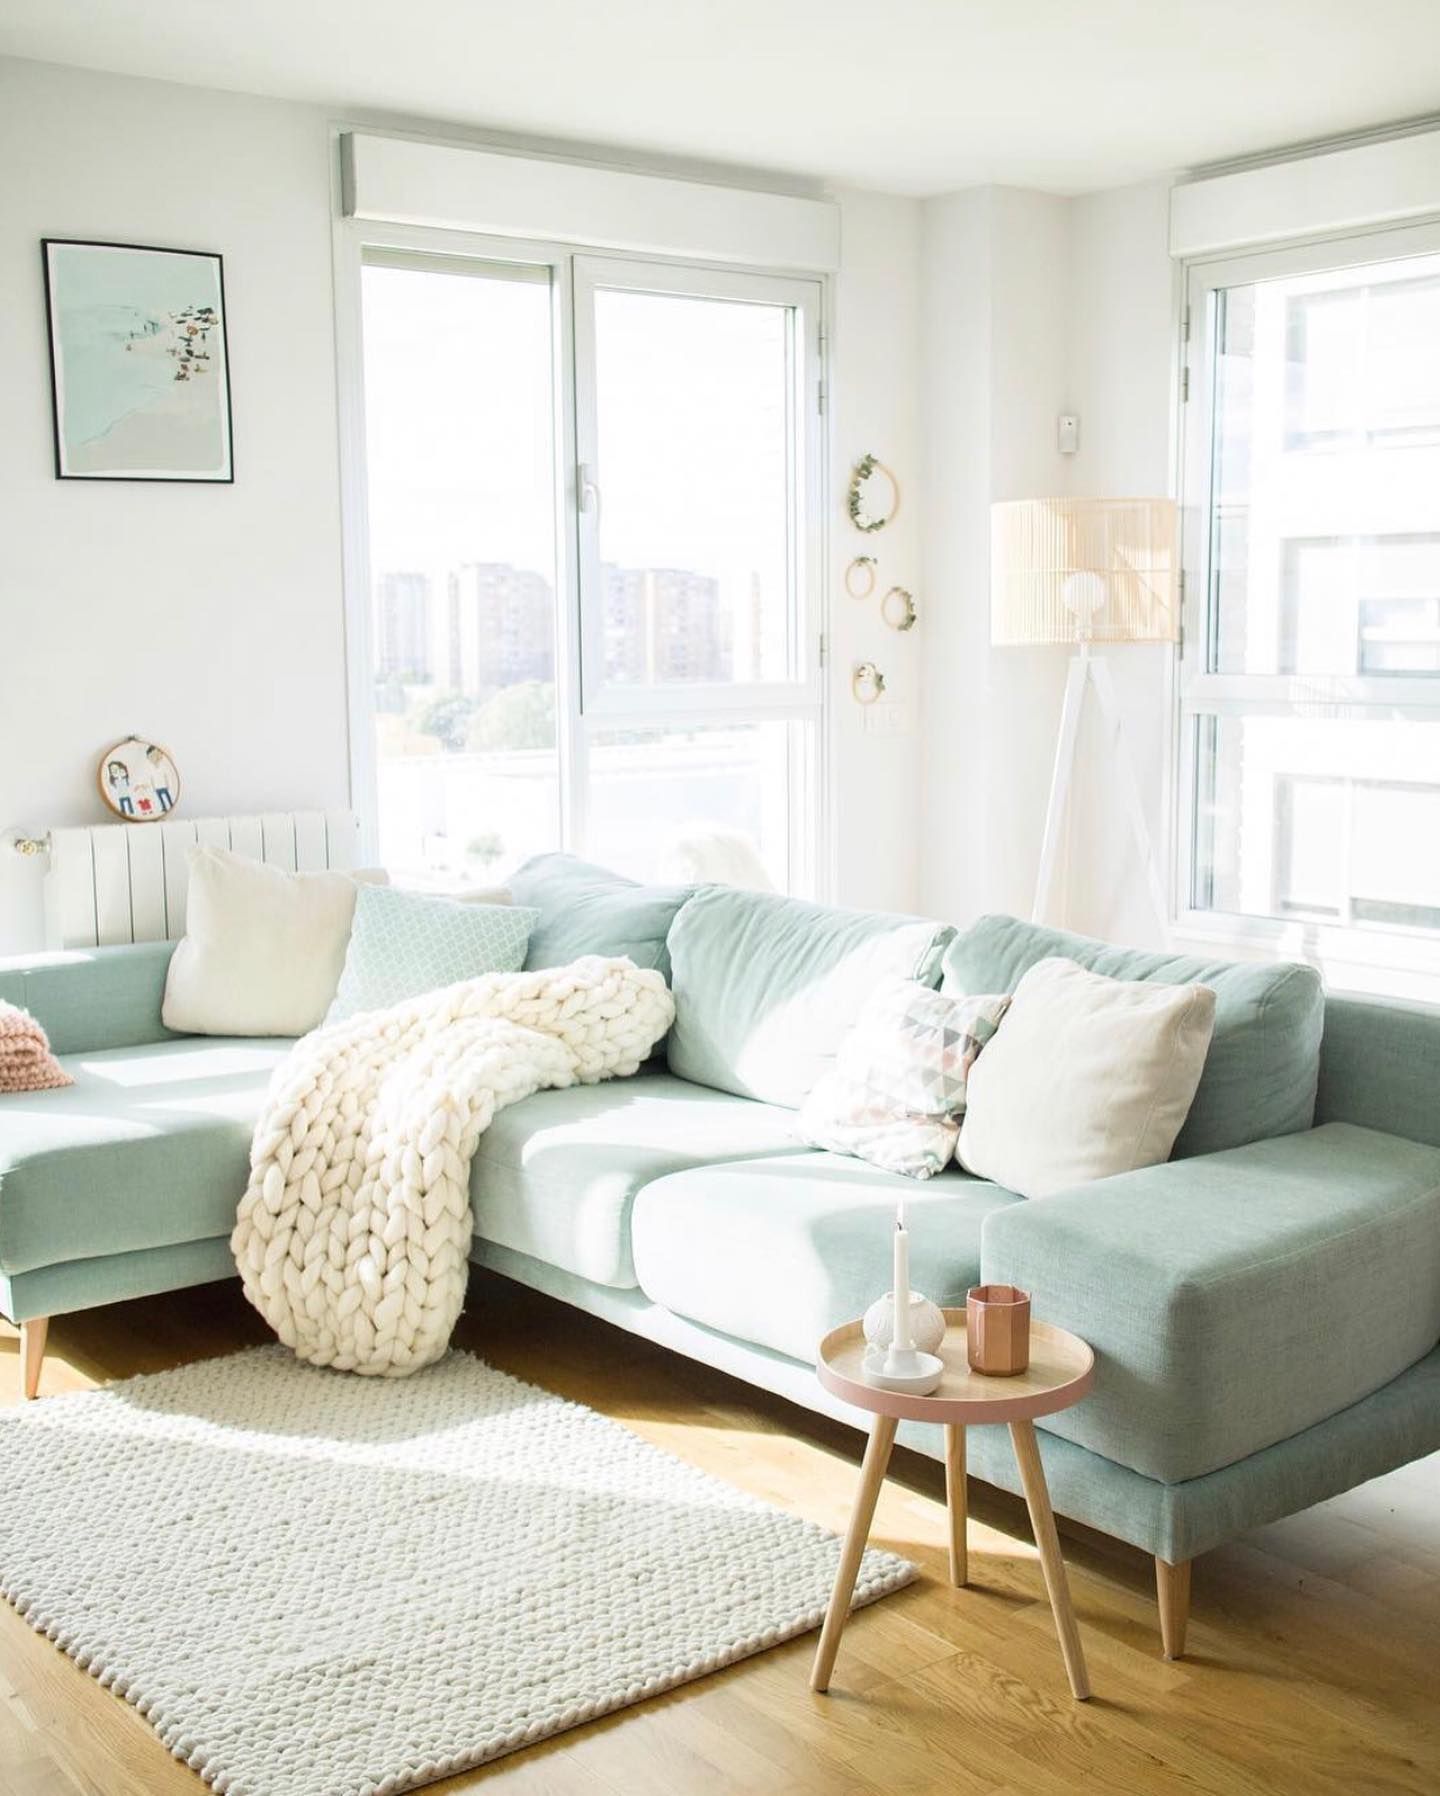 Mint Color In The Interiors Freshen Up Your Home with Minty Green Decor